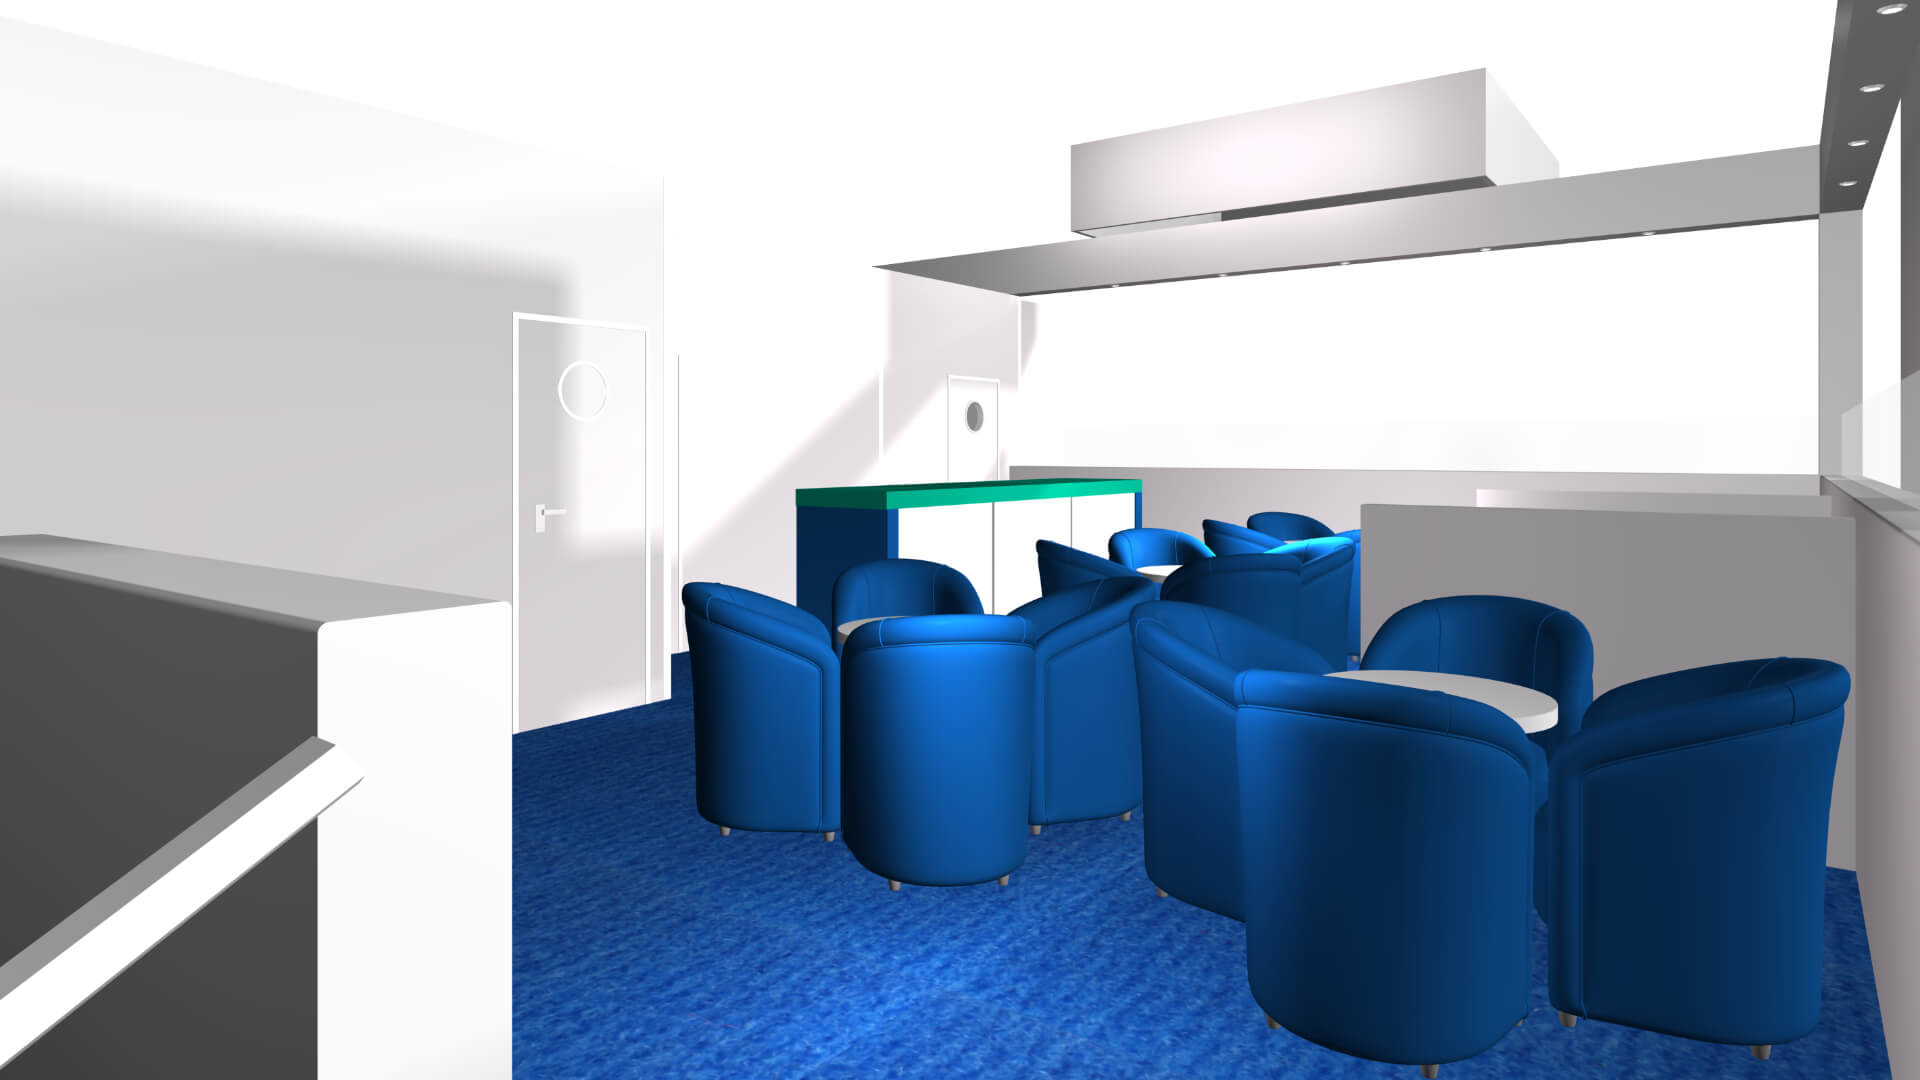 exhibition cad tables with blue chairs